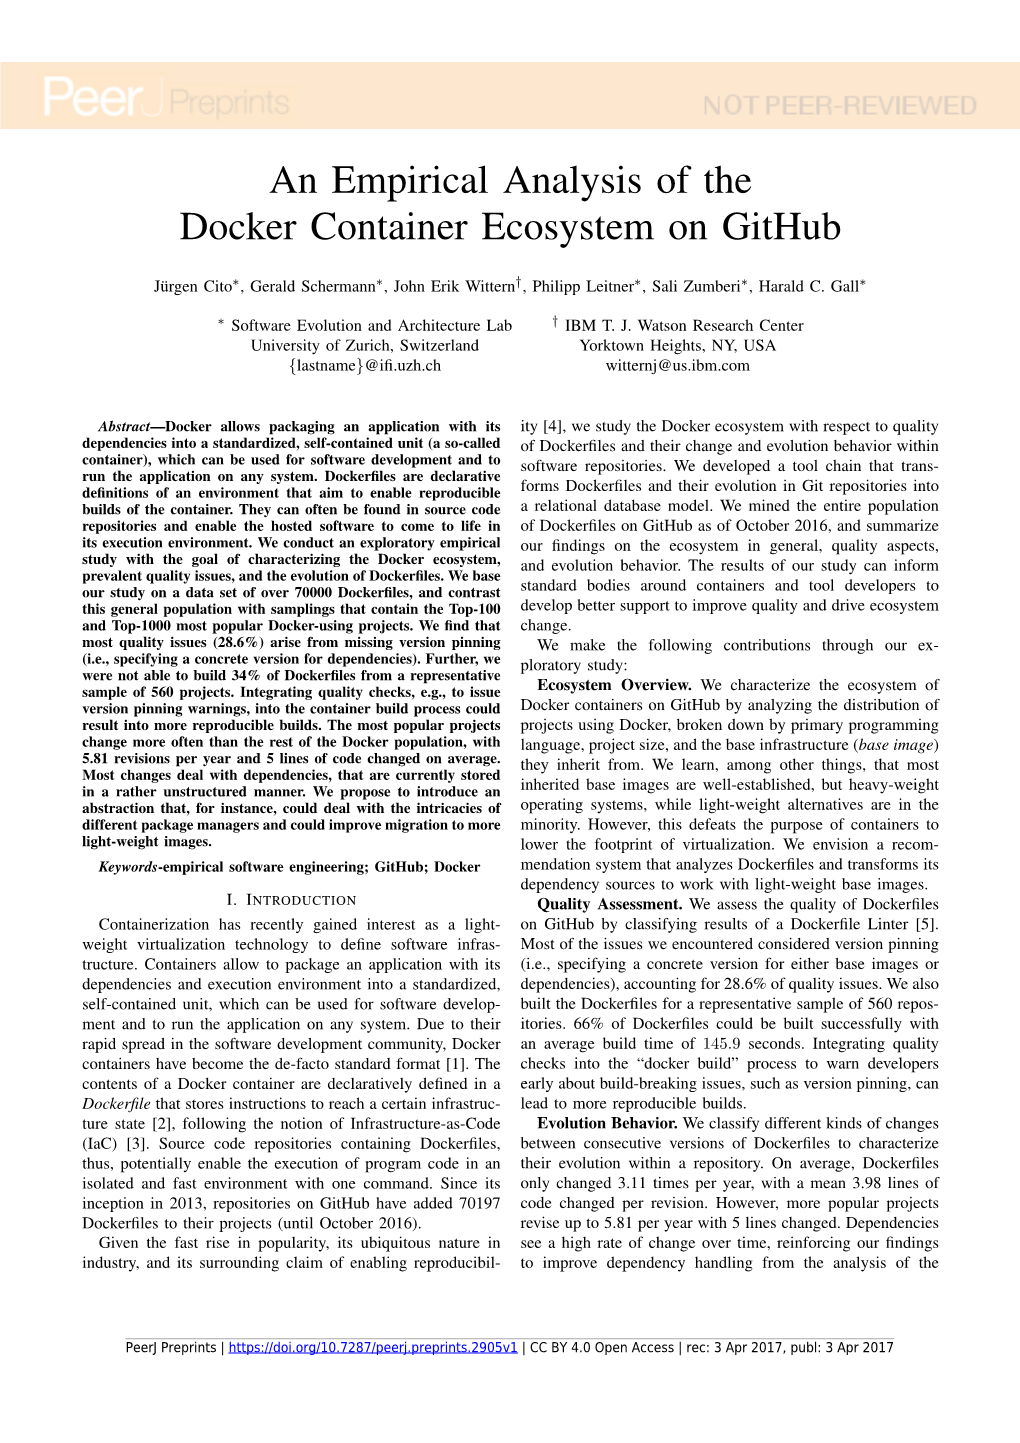 An Empirical Analysis of the Docker Container Ecosystem on Github